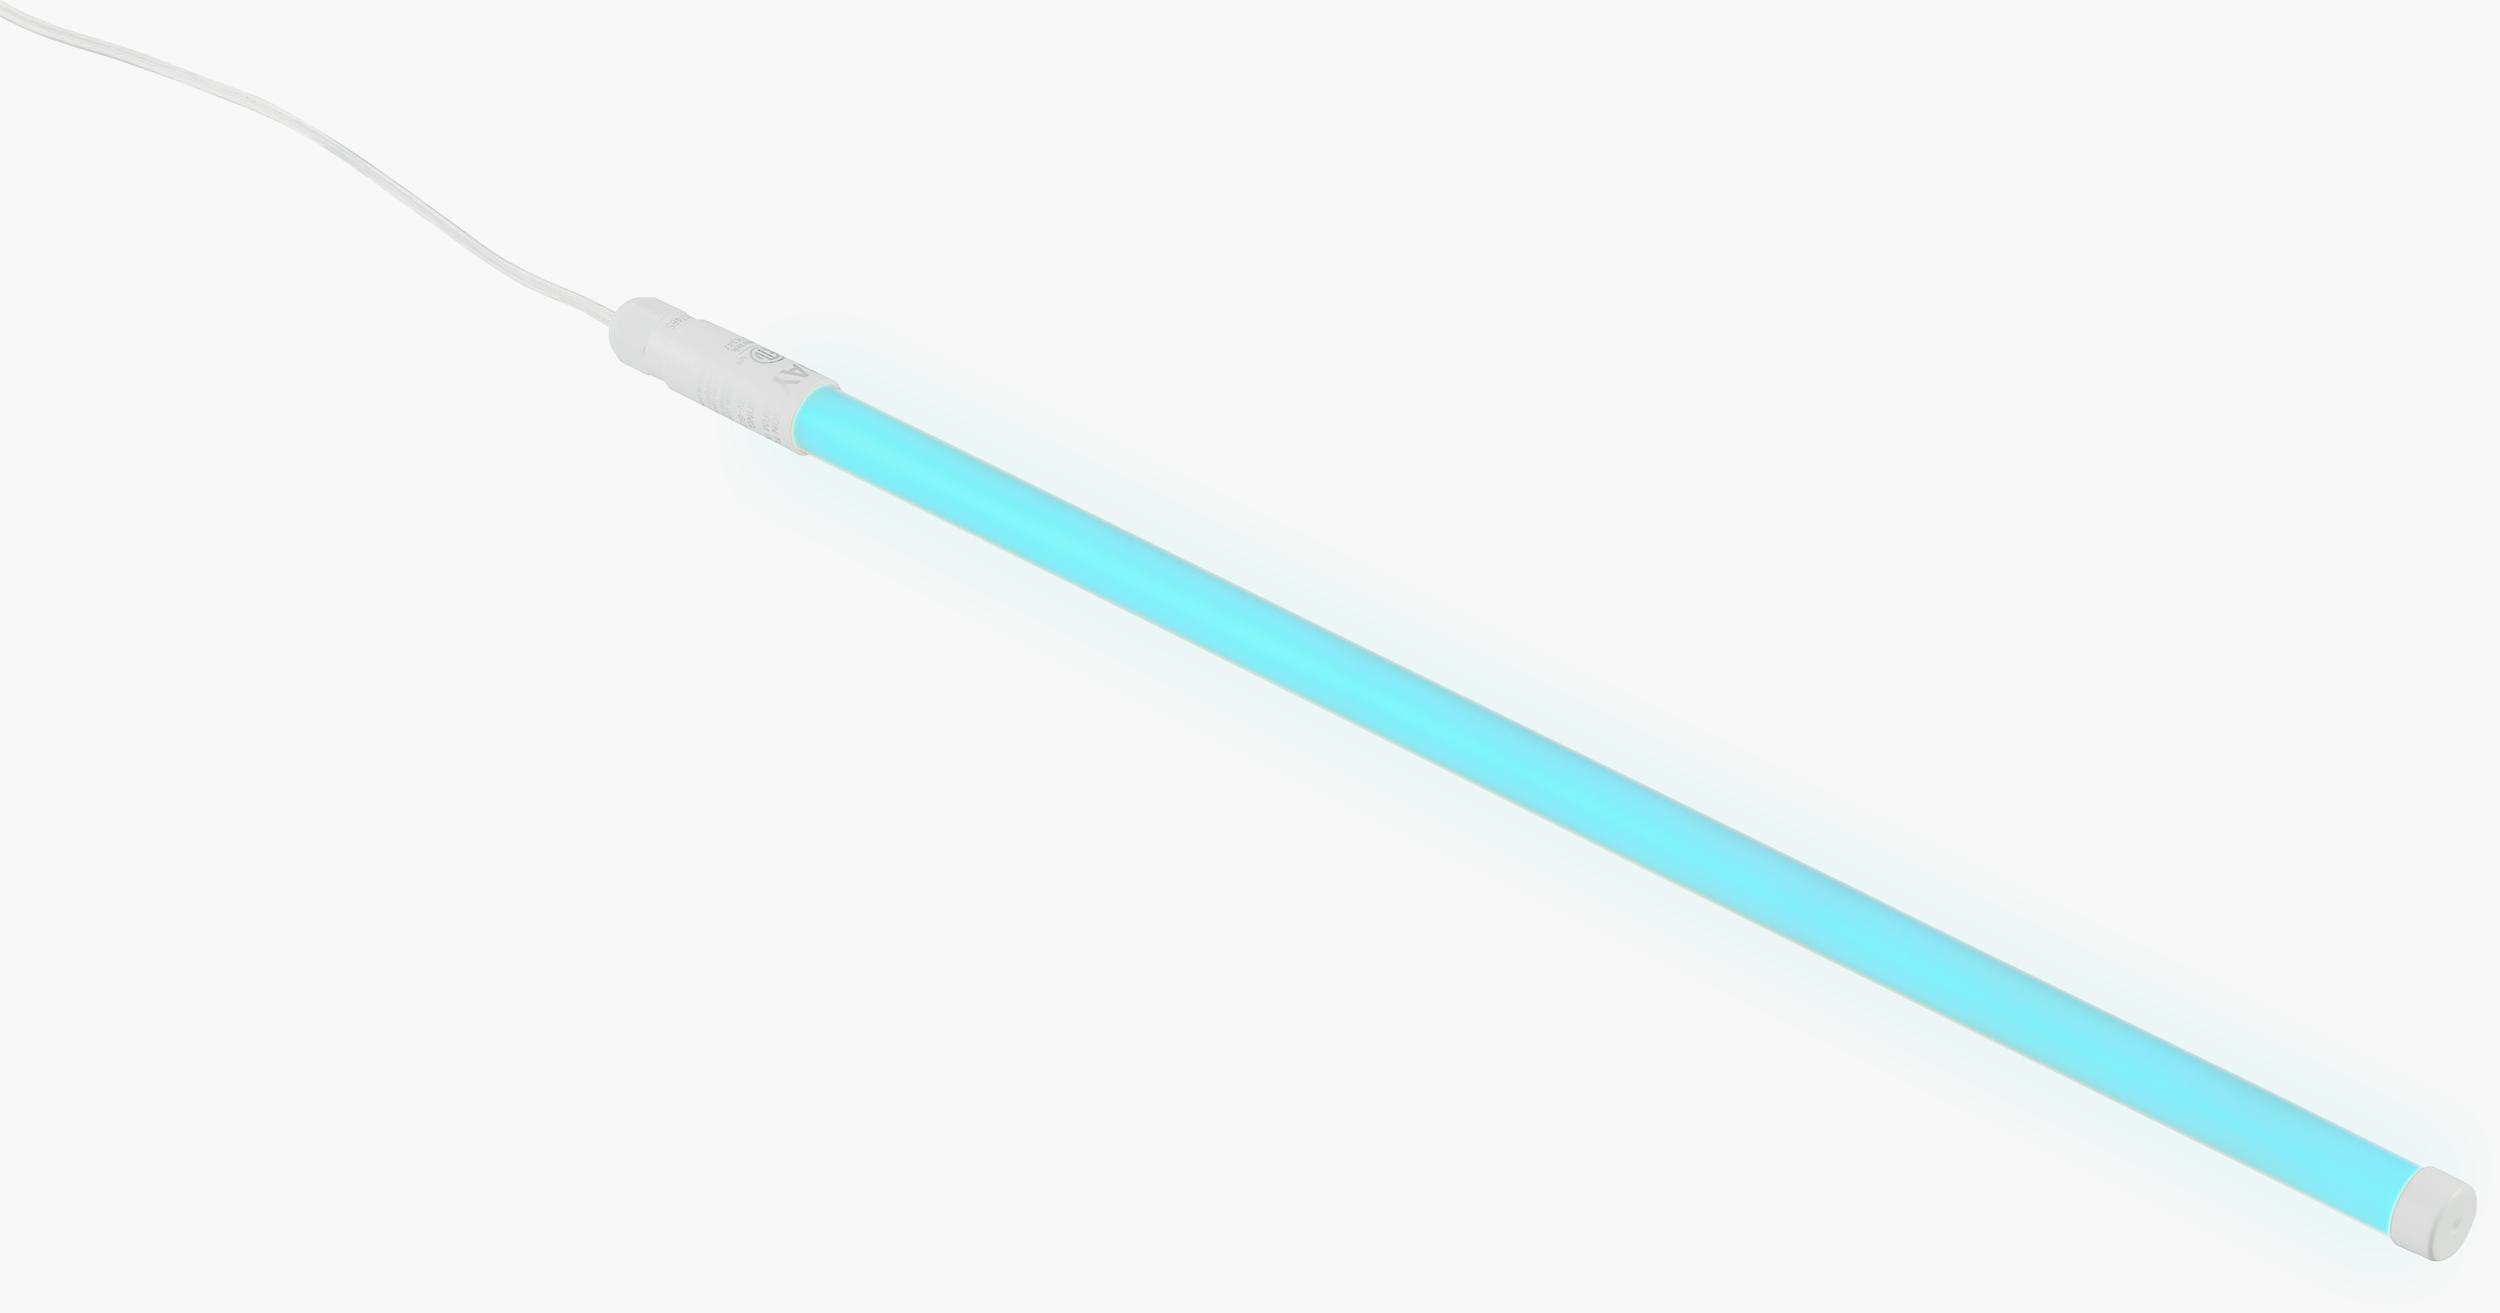 Buy the HAY Neon Tube LED Light at